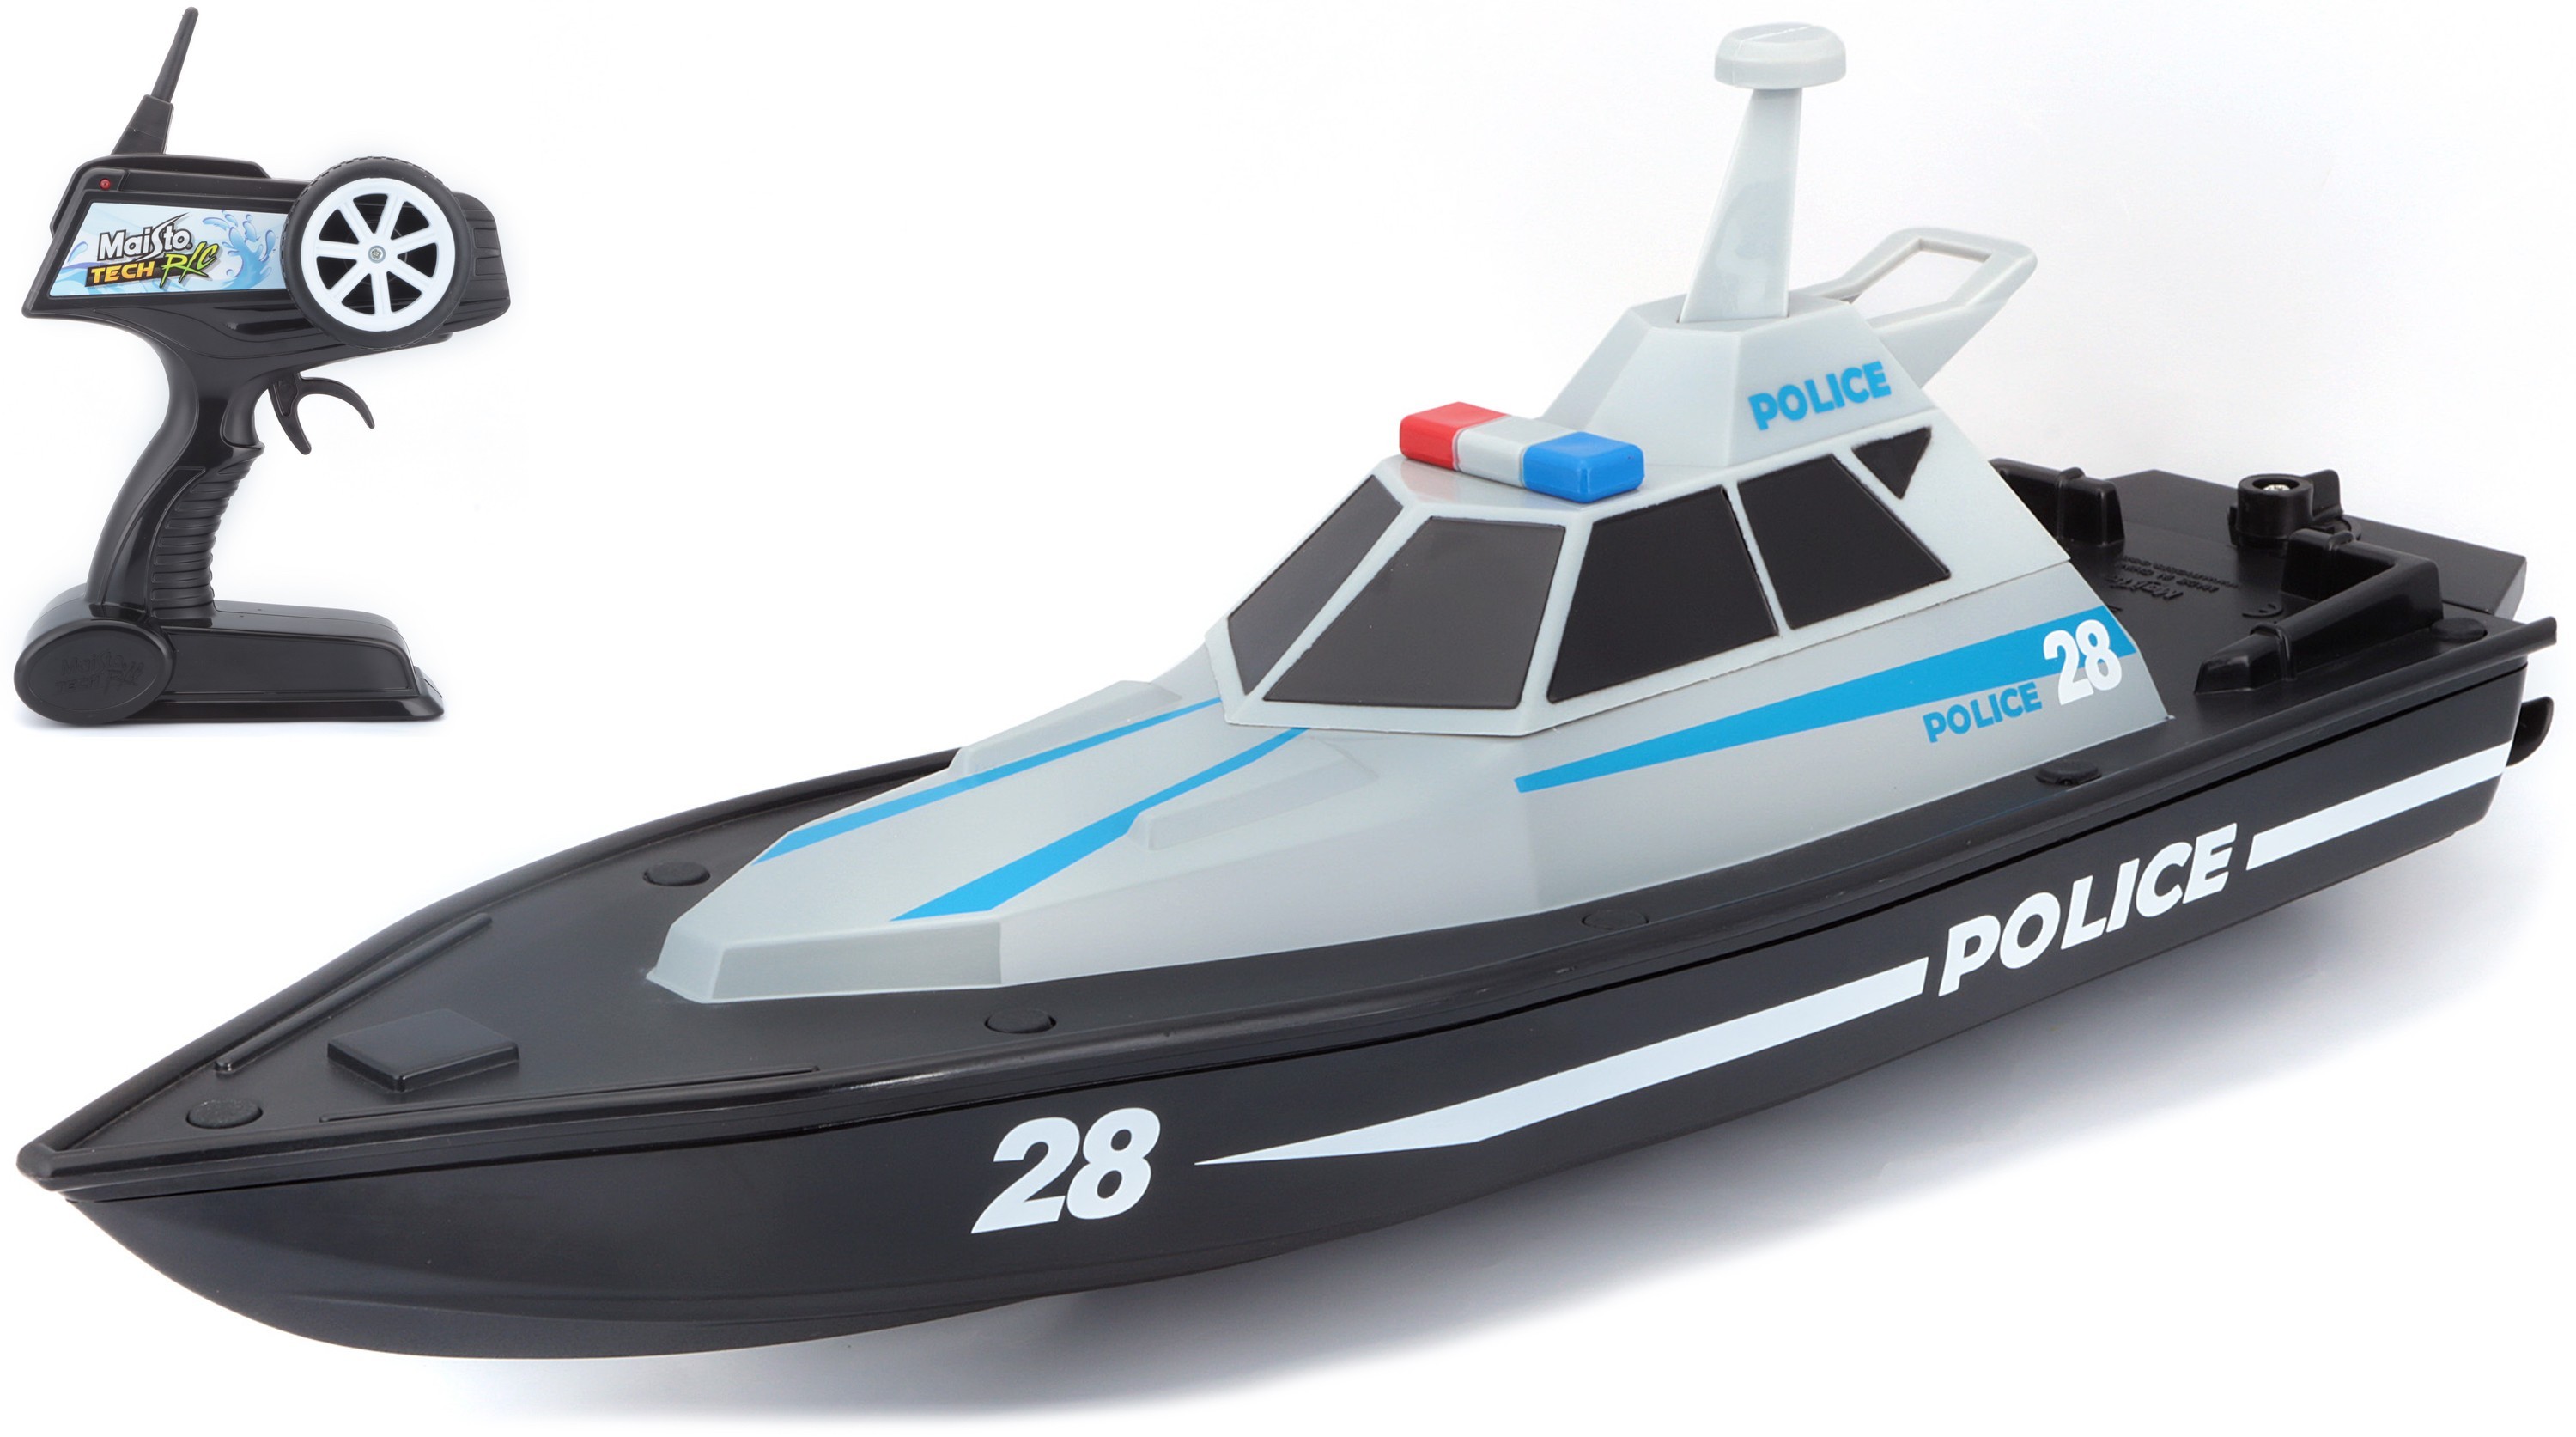 HI-SPEED POLICE BOAT 2.4 GHz RADIO CONTROLE (USB rechargeable)